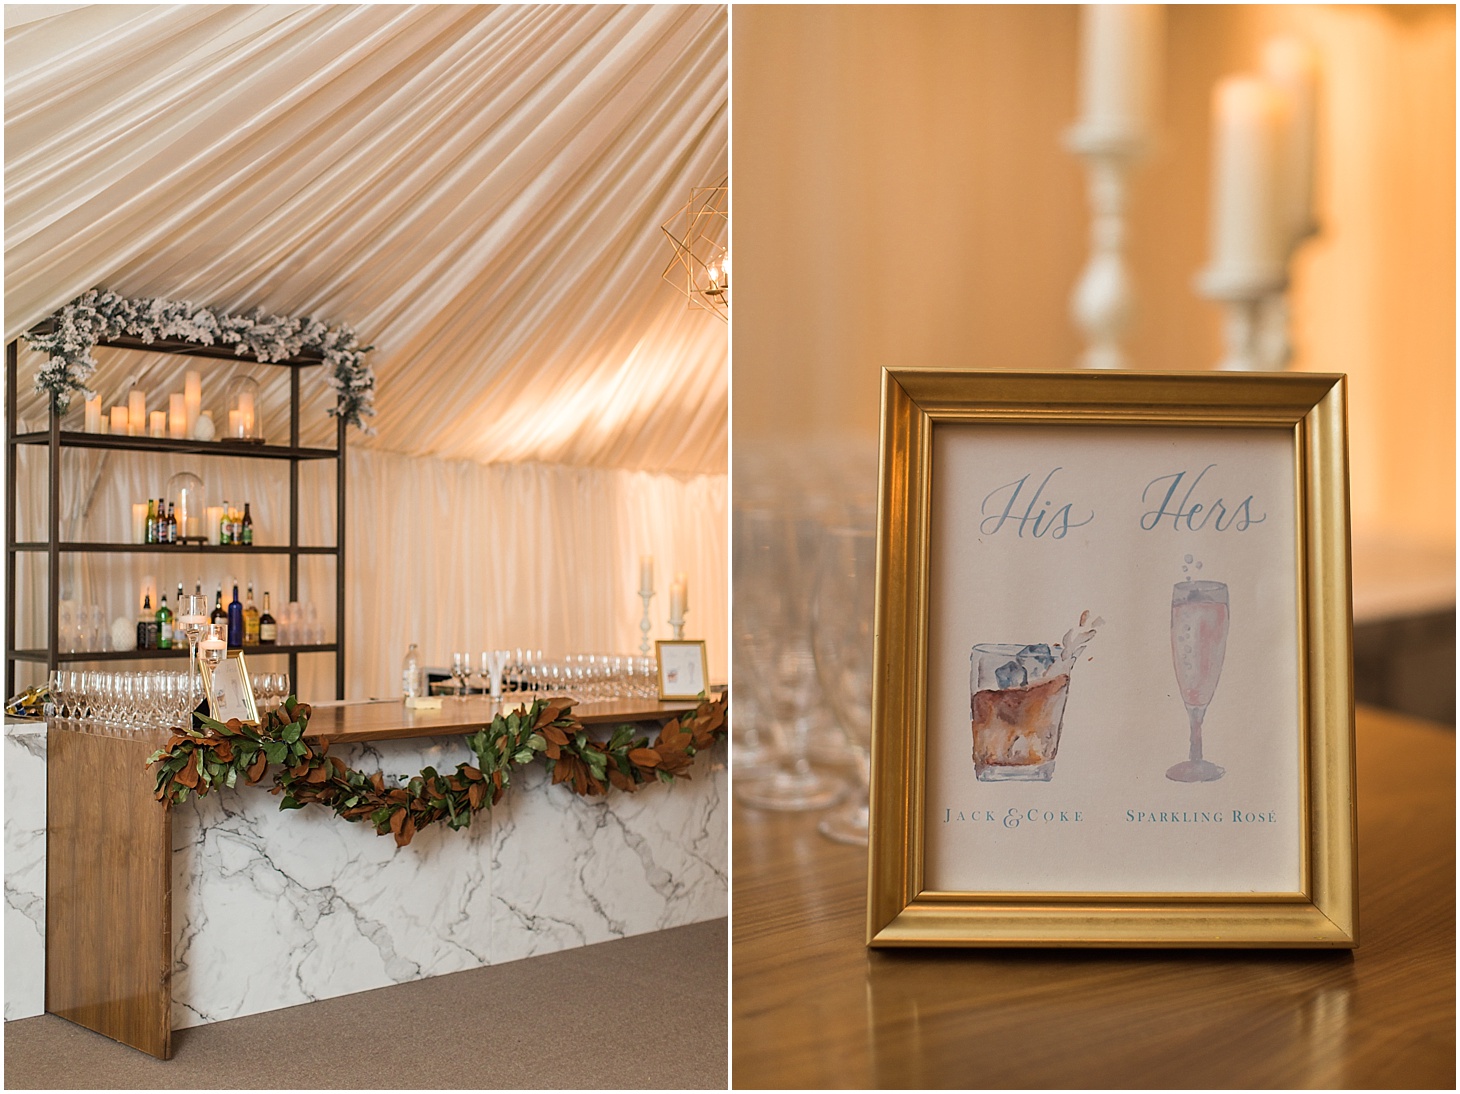 Wedding Bar and Signature Cocktails | Southern Black Tie wedding at St. Regis DC in Dusty Blue and Ivory | Sarah Bradshaw Photography